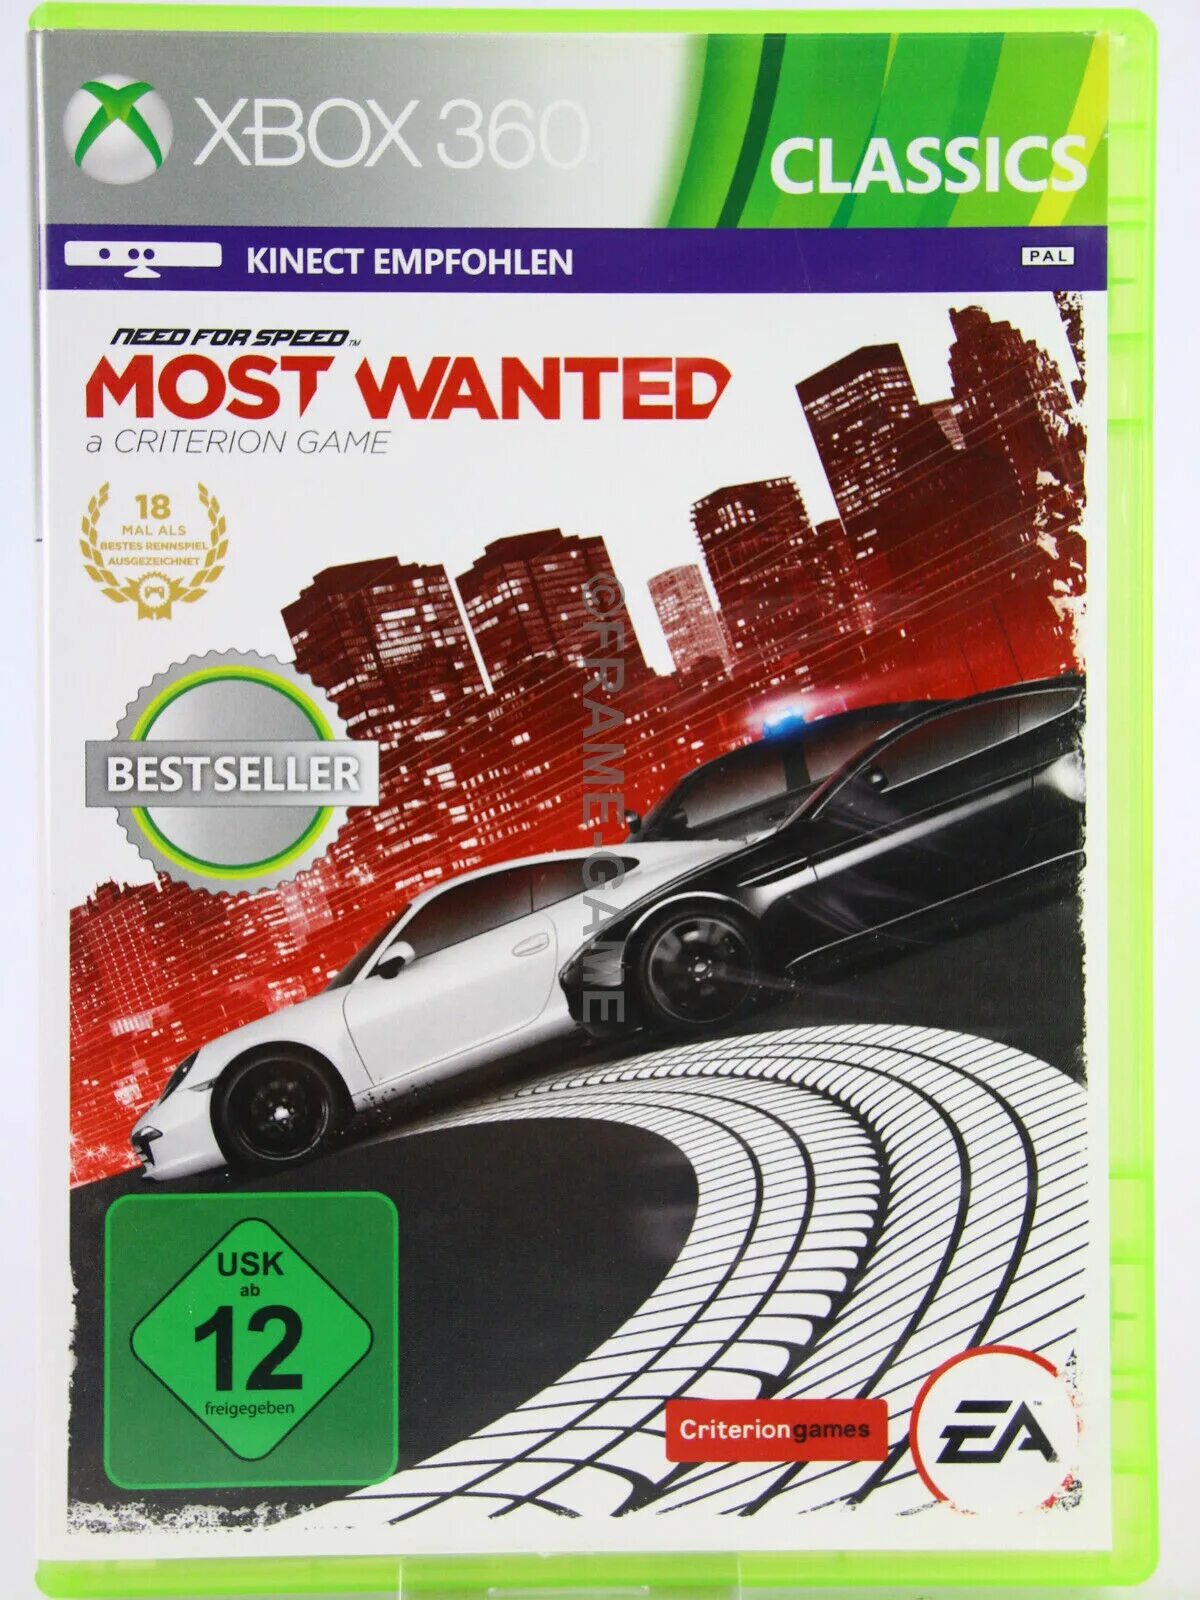 Most wanted Xbox 360. Xbox 360 most wanted Classic диск. Kinect Xbox 360 NFS. Kinect Xbox 360 NFS most wanted. Nfs most wanted xbox